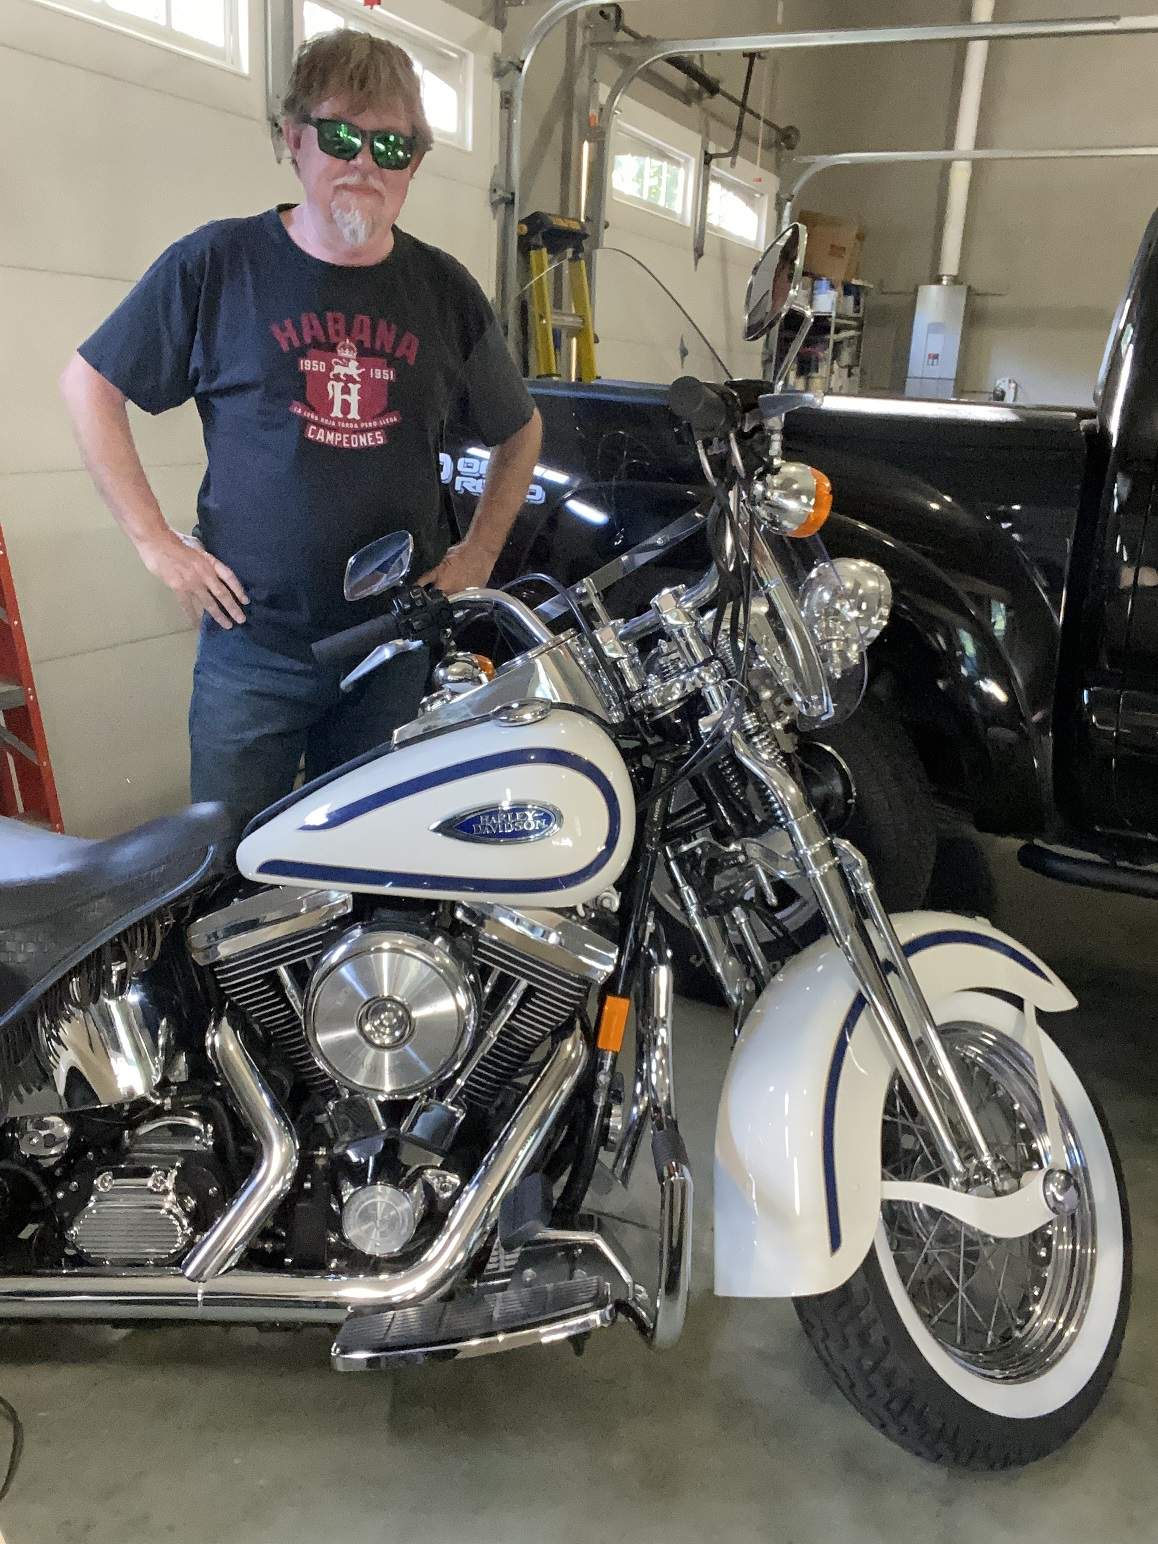 Greg with his old Harley in a humidity controlled garage